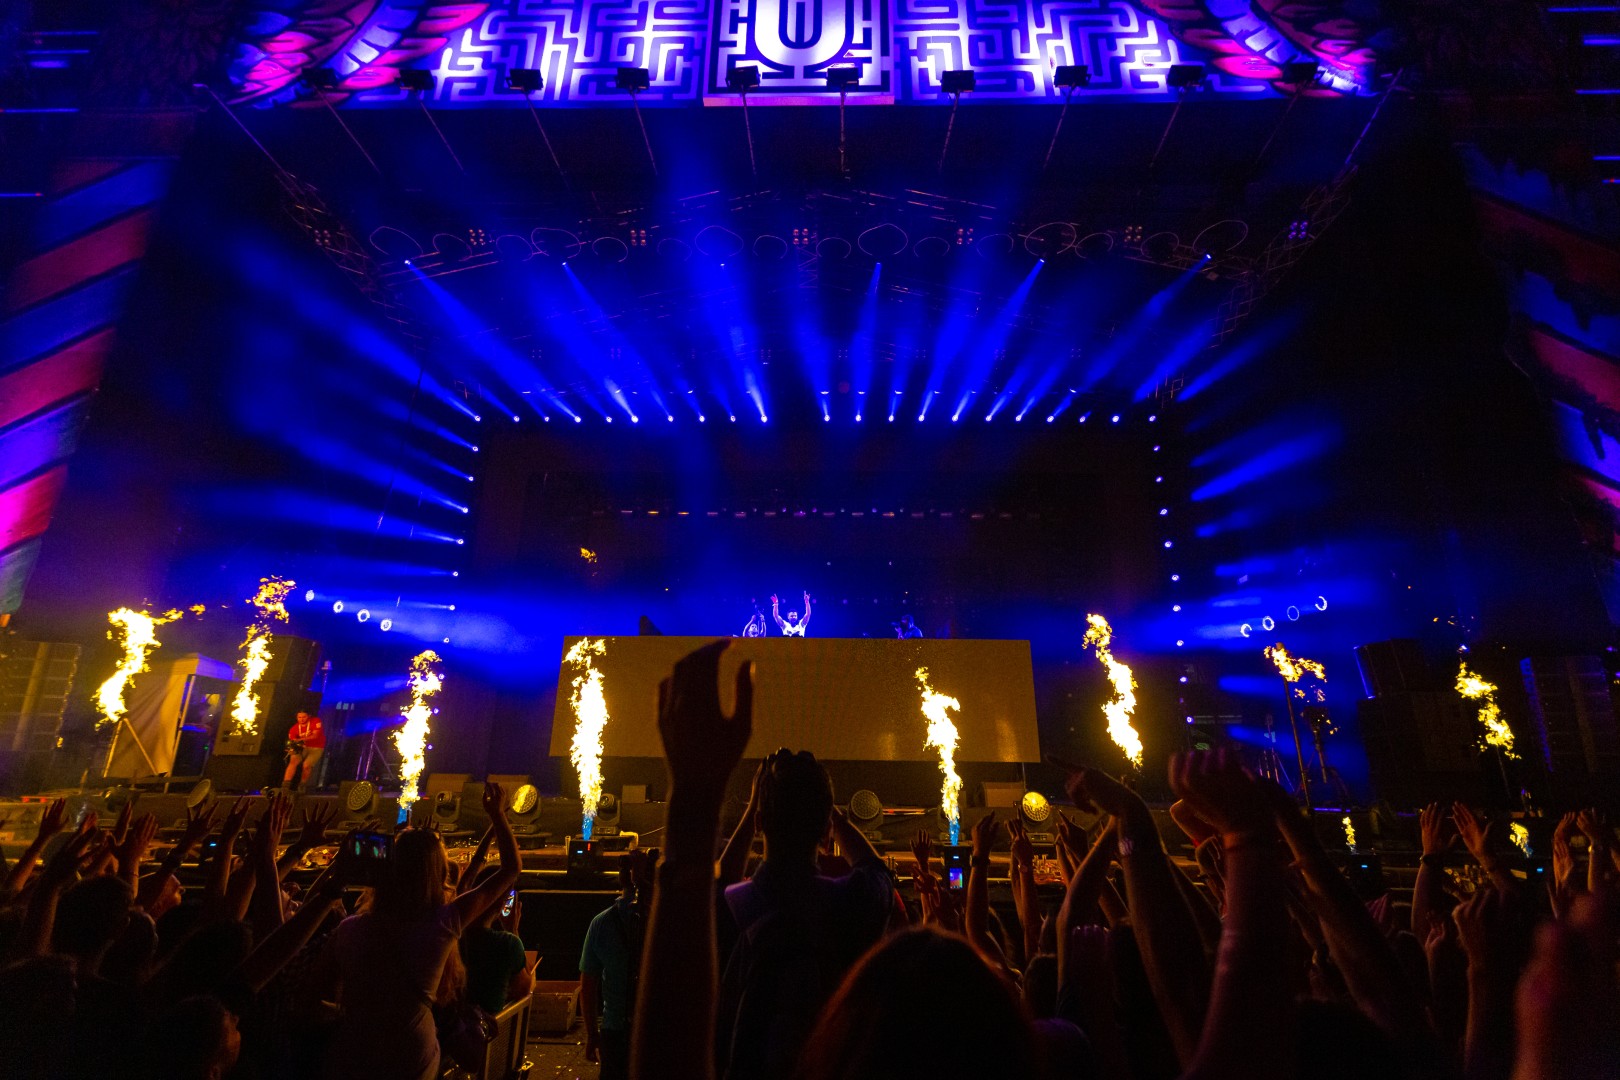 ATB at Cluj Arena in Cluj-Napoca on July 31, 2015 (f22648a650)